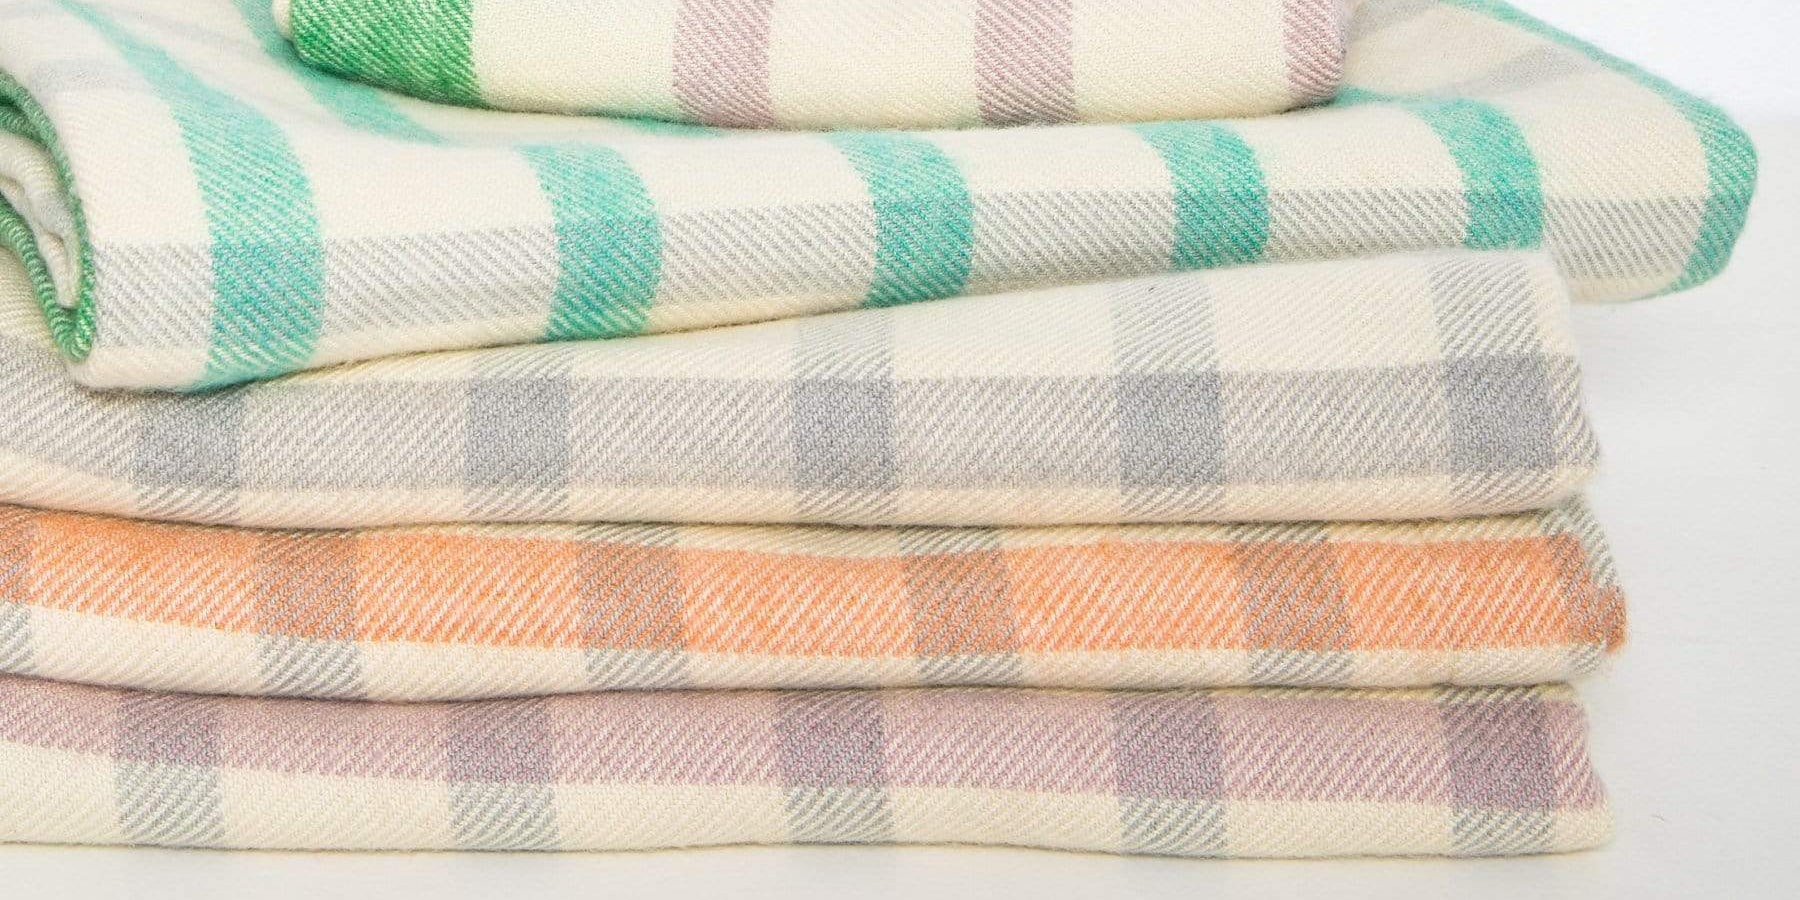 One mum's search for the perfect baby blanket